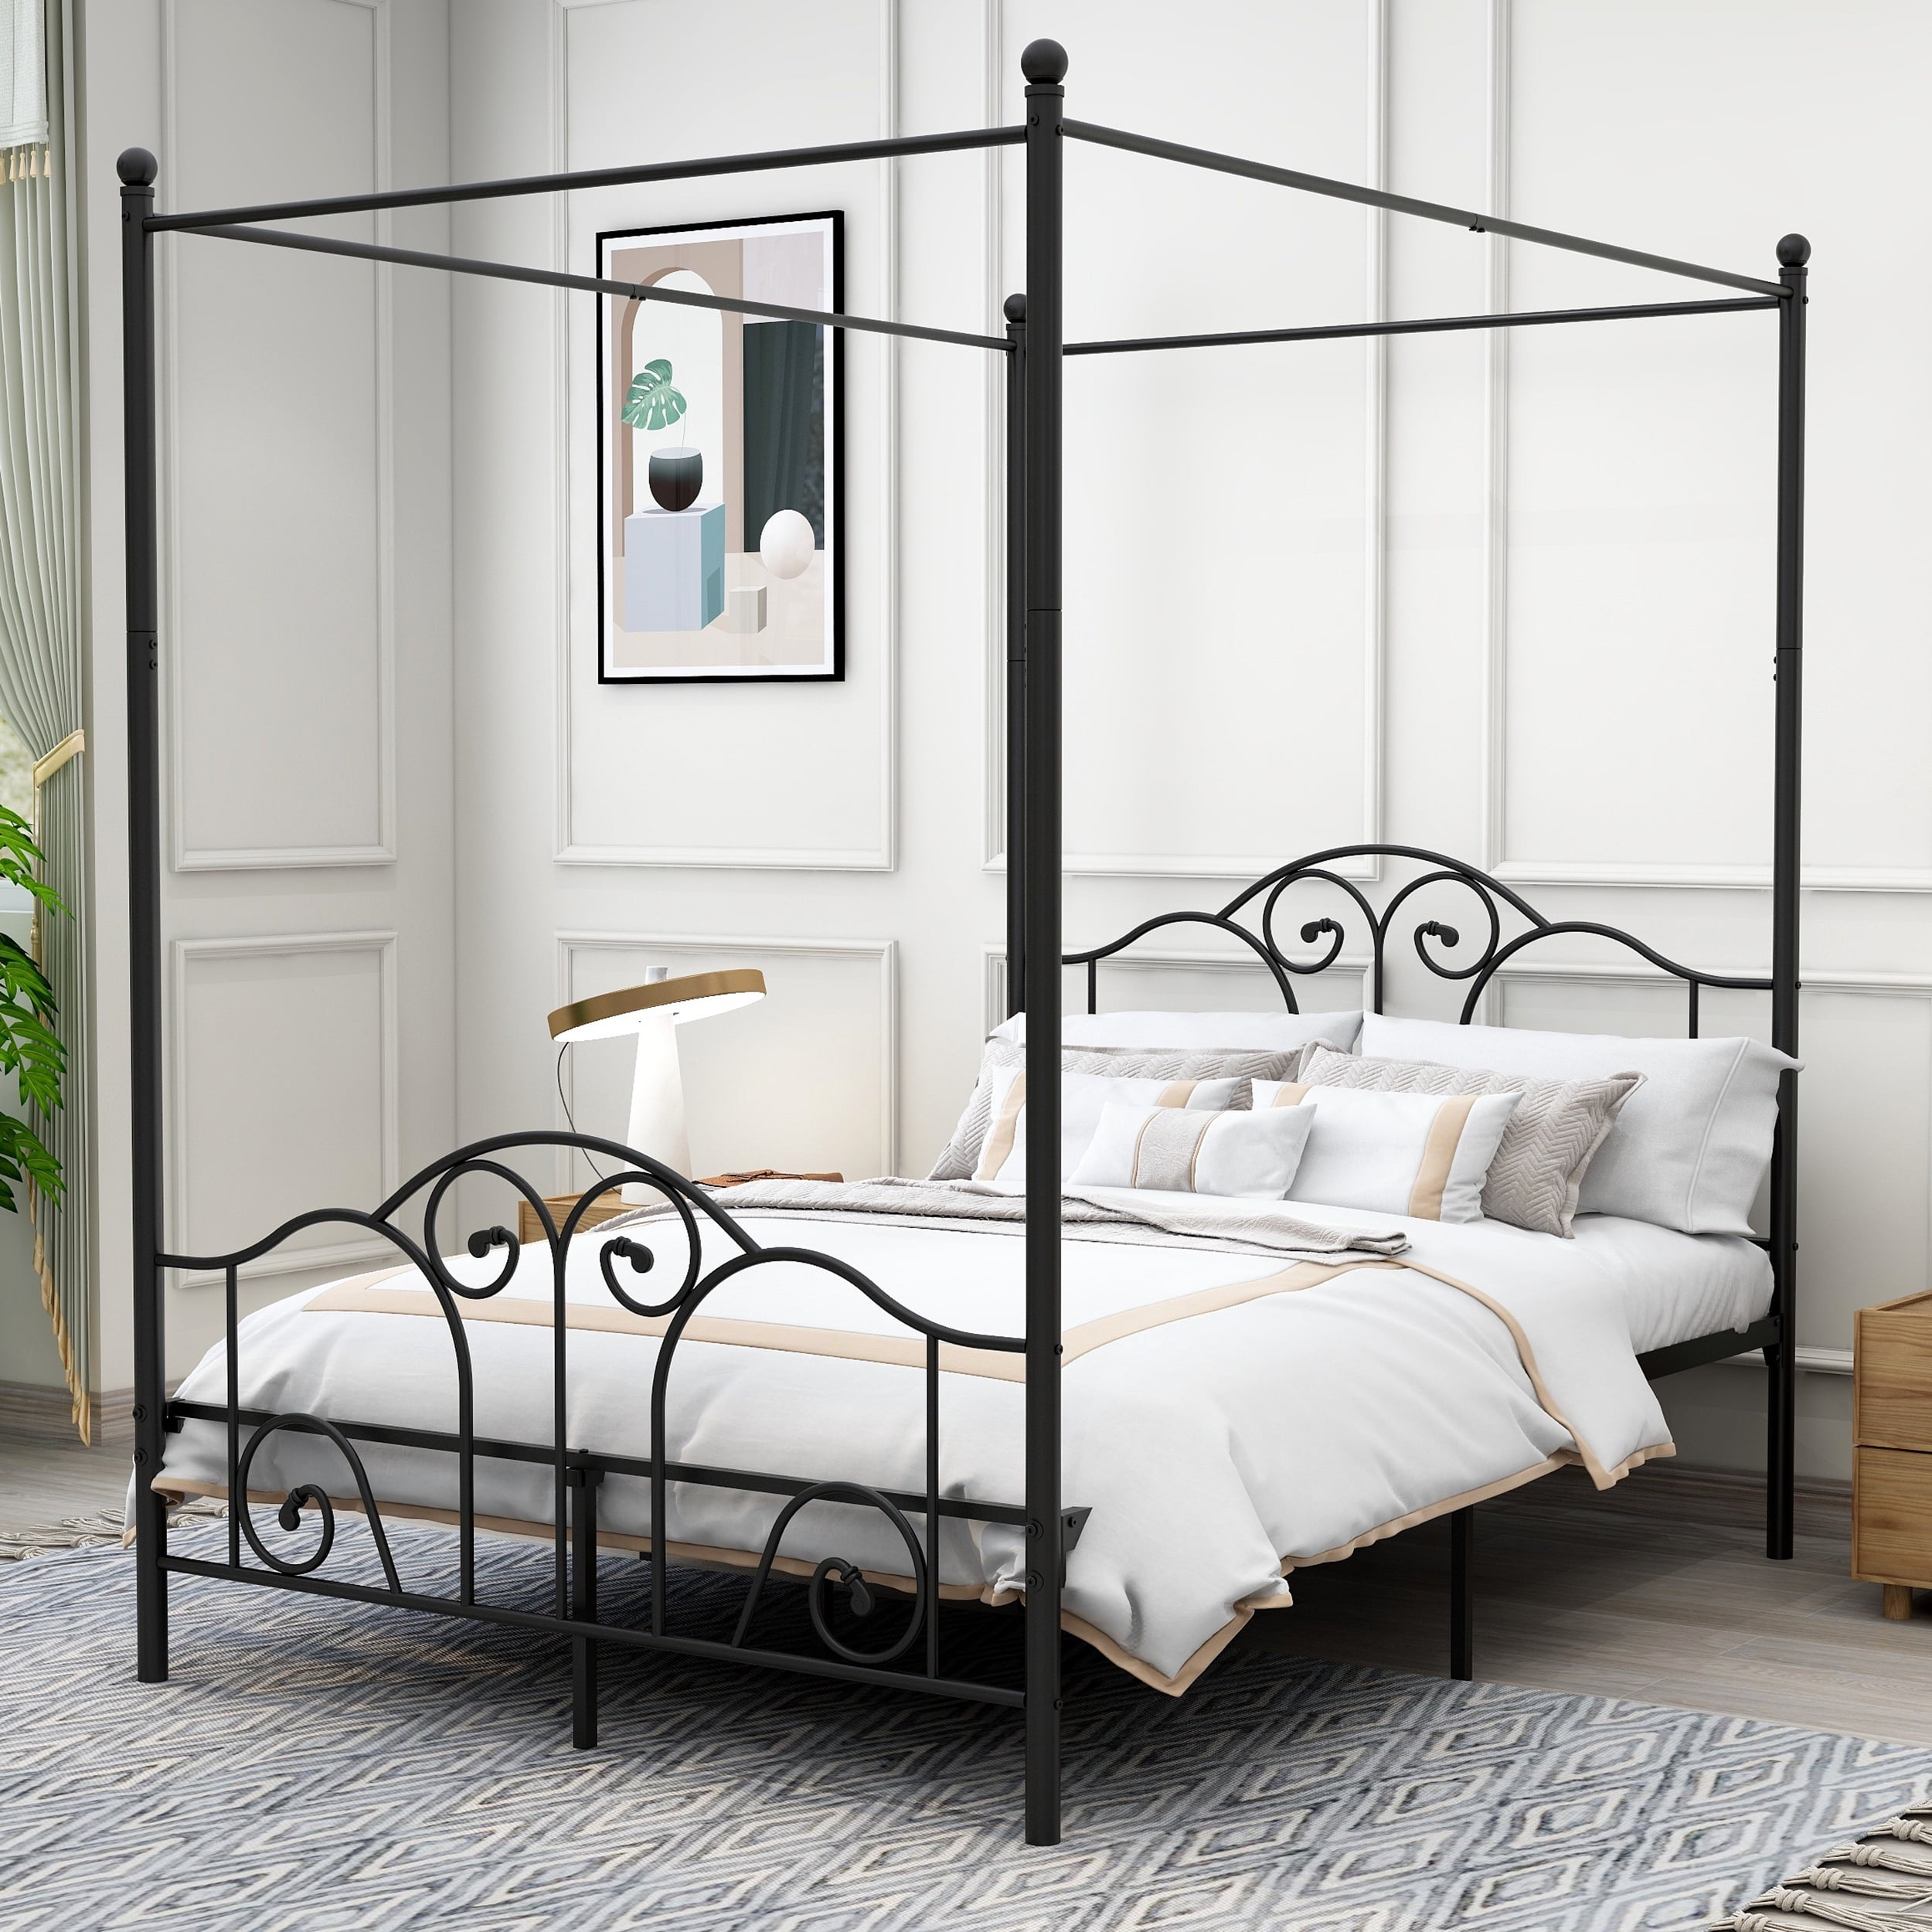 AUFANK Vintage Four Post Metal Canopy Bed Frame, Full Size, Black ...